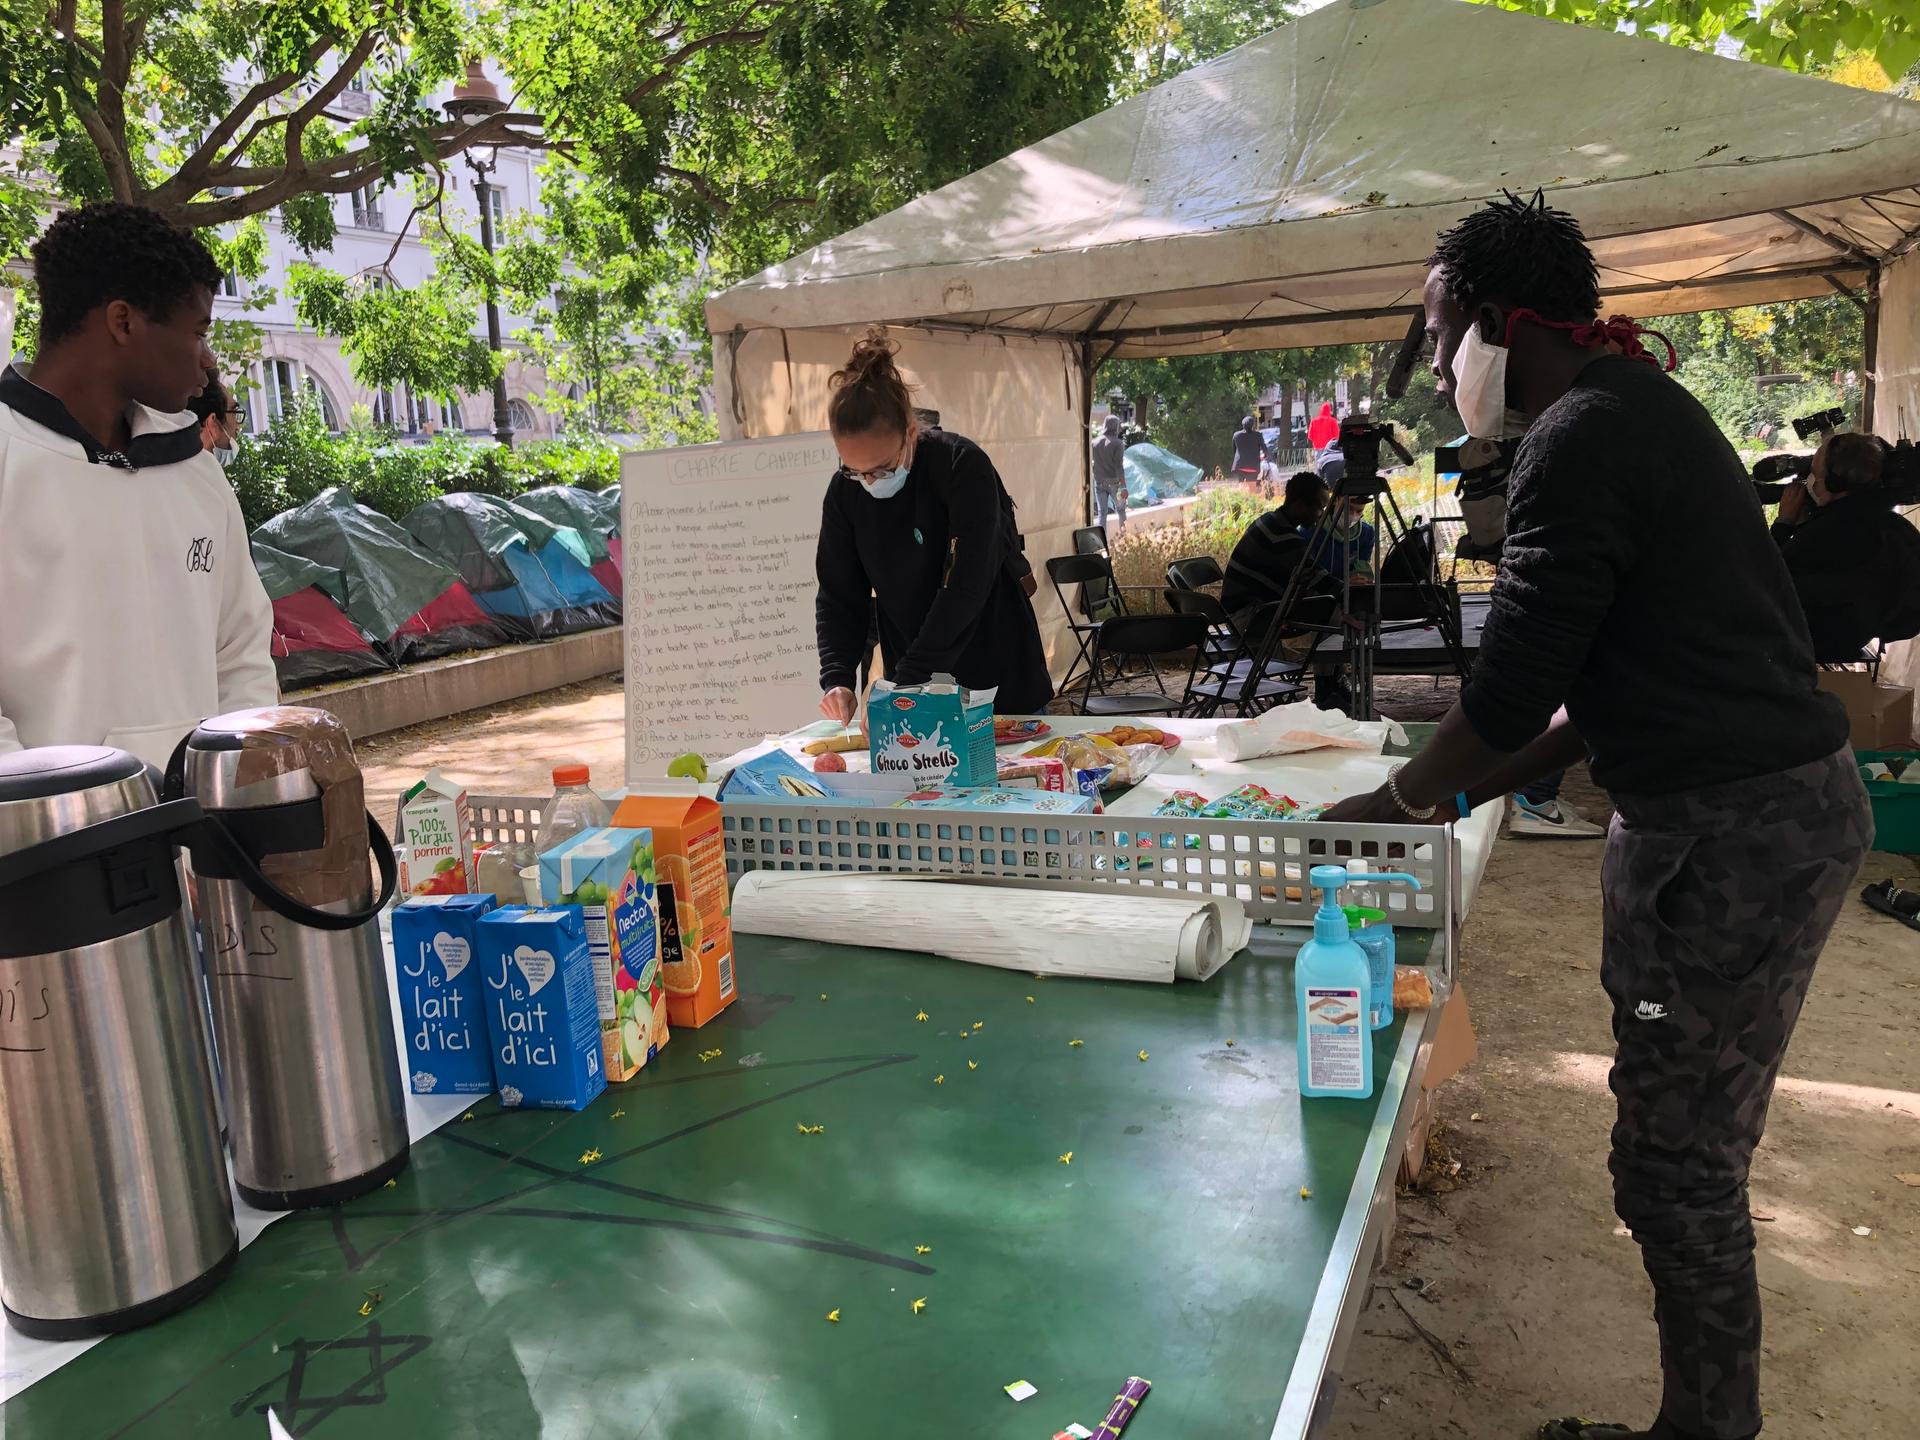 The temporary camp for 100 migrants in Paris was set up by five nongovernmental organizations who are trying to help the boys find permanent housing. Here, breakfast was being served to the boys.